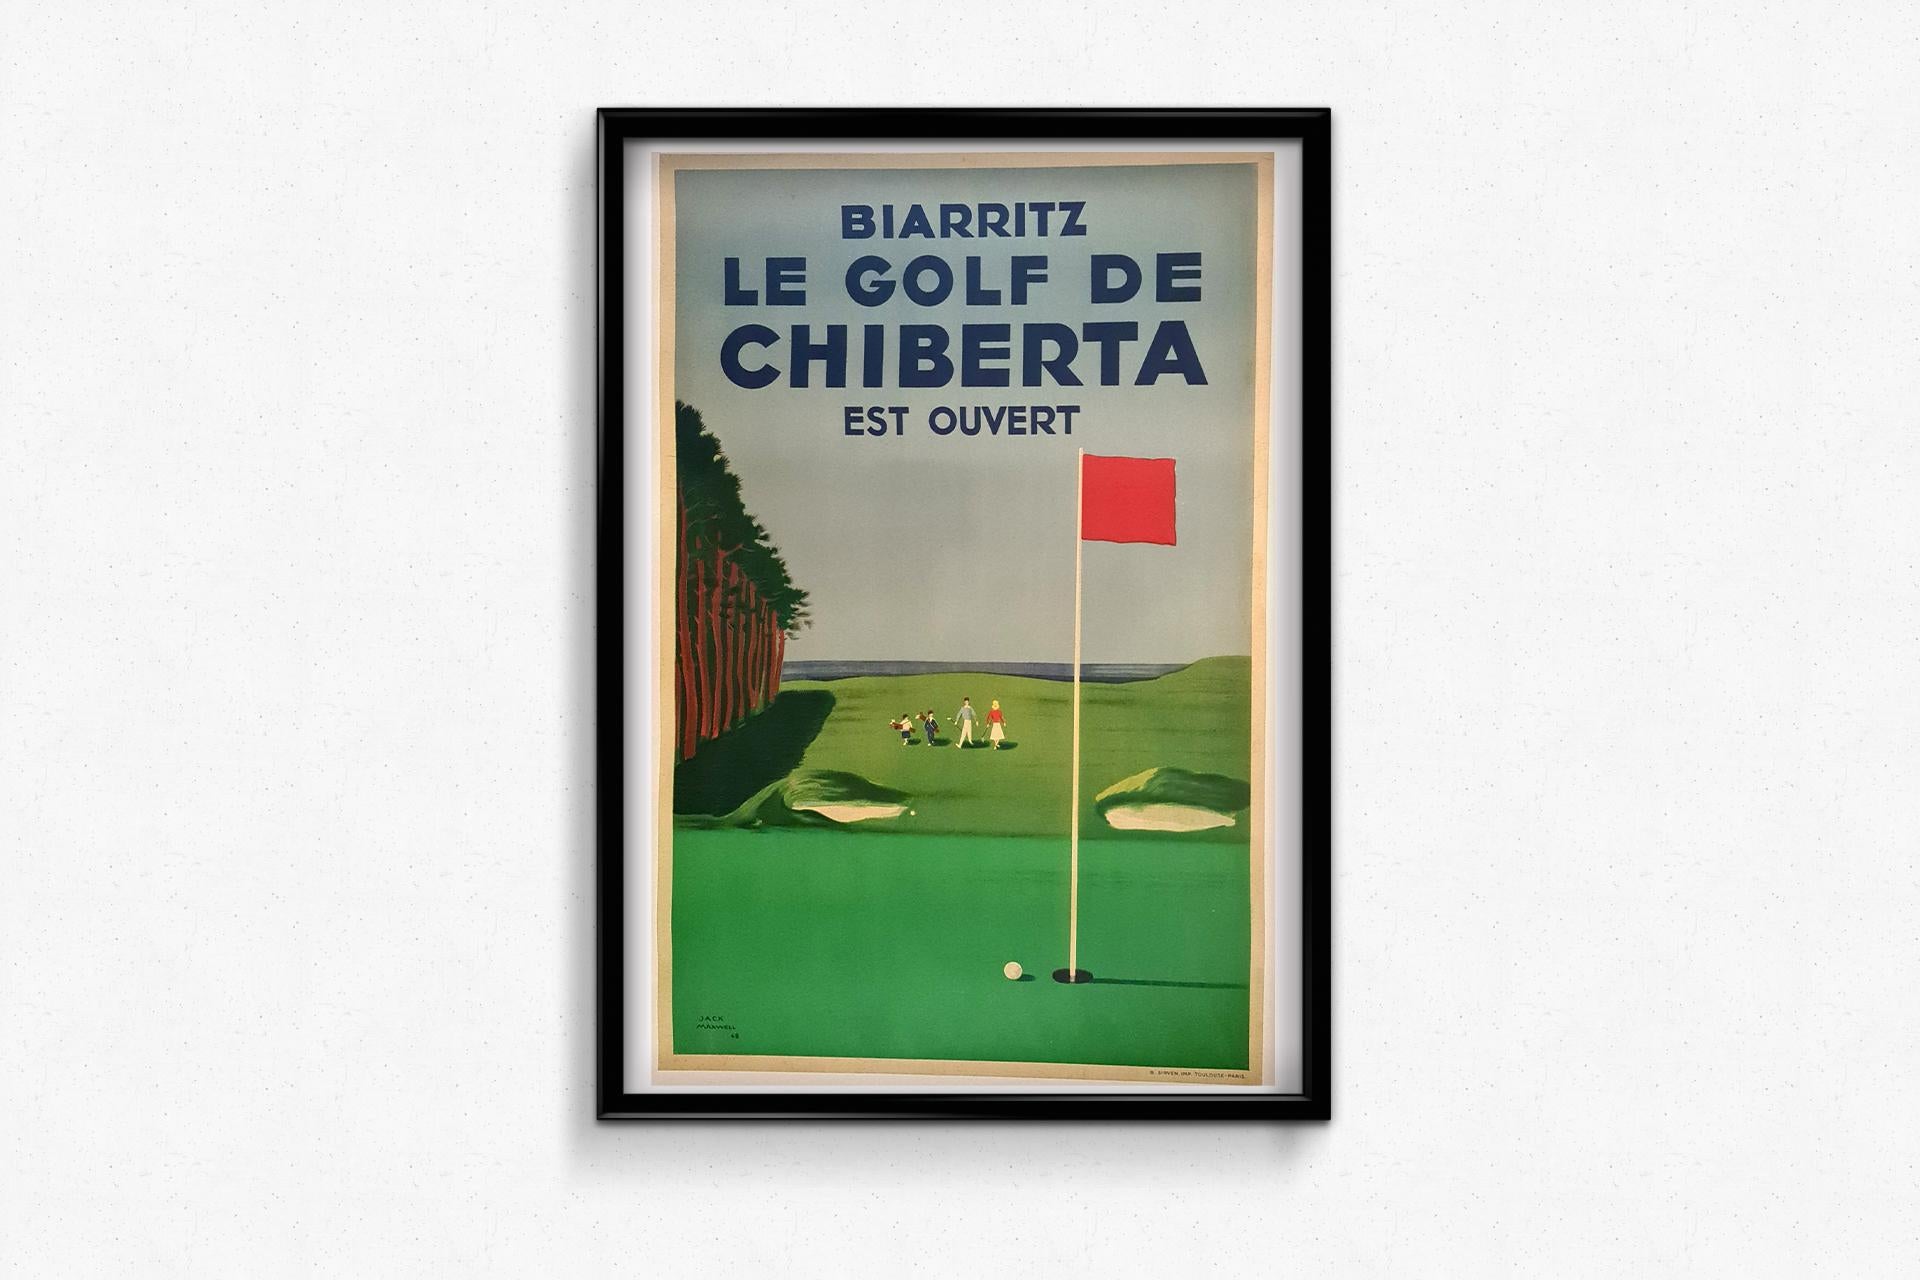 A splendid and historical poster made by Jack Maxwell in 1948.

⛳️ The history of this legendary golf course begins in 1924: the company 